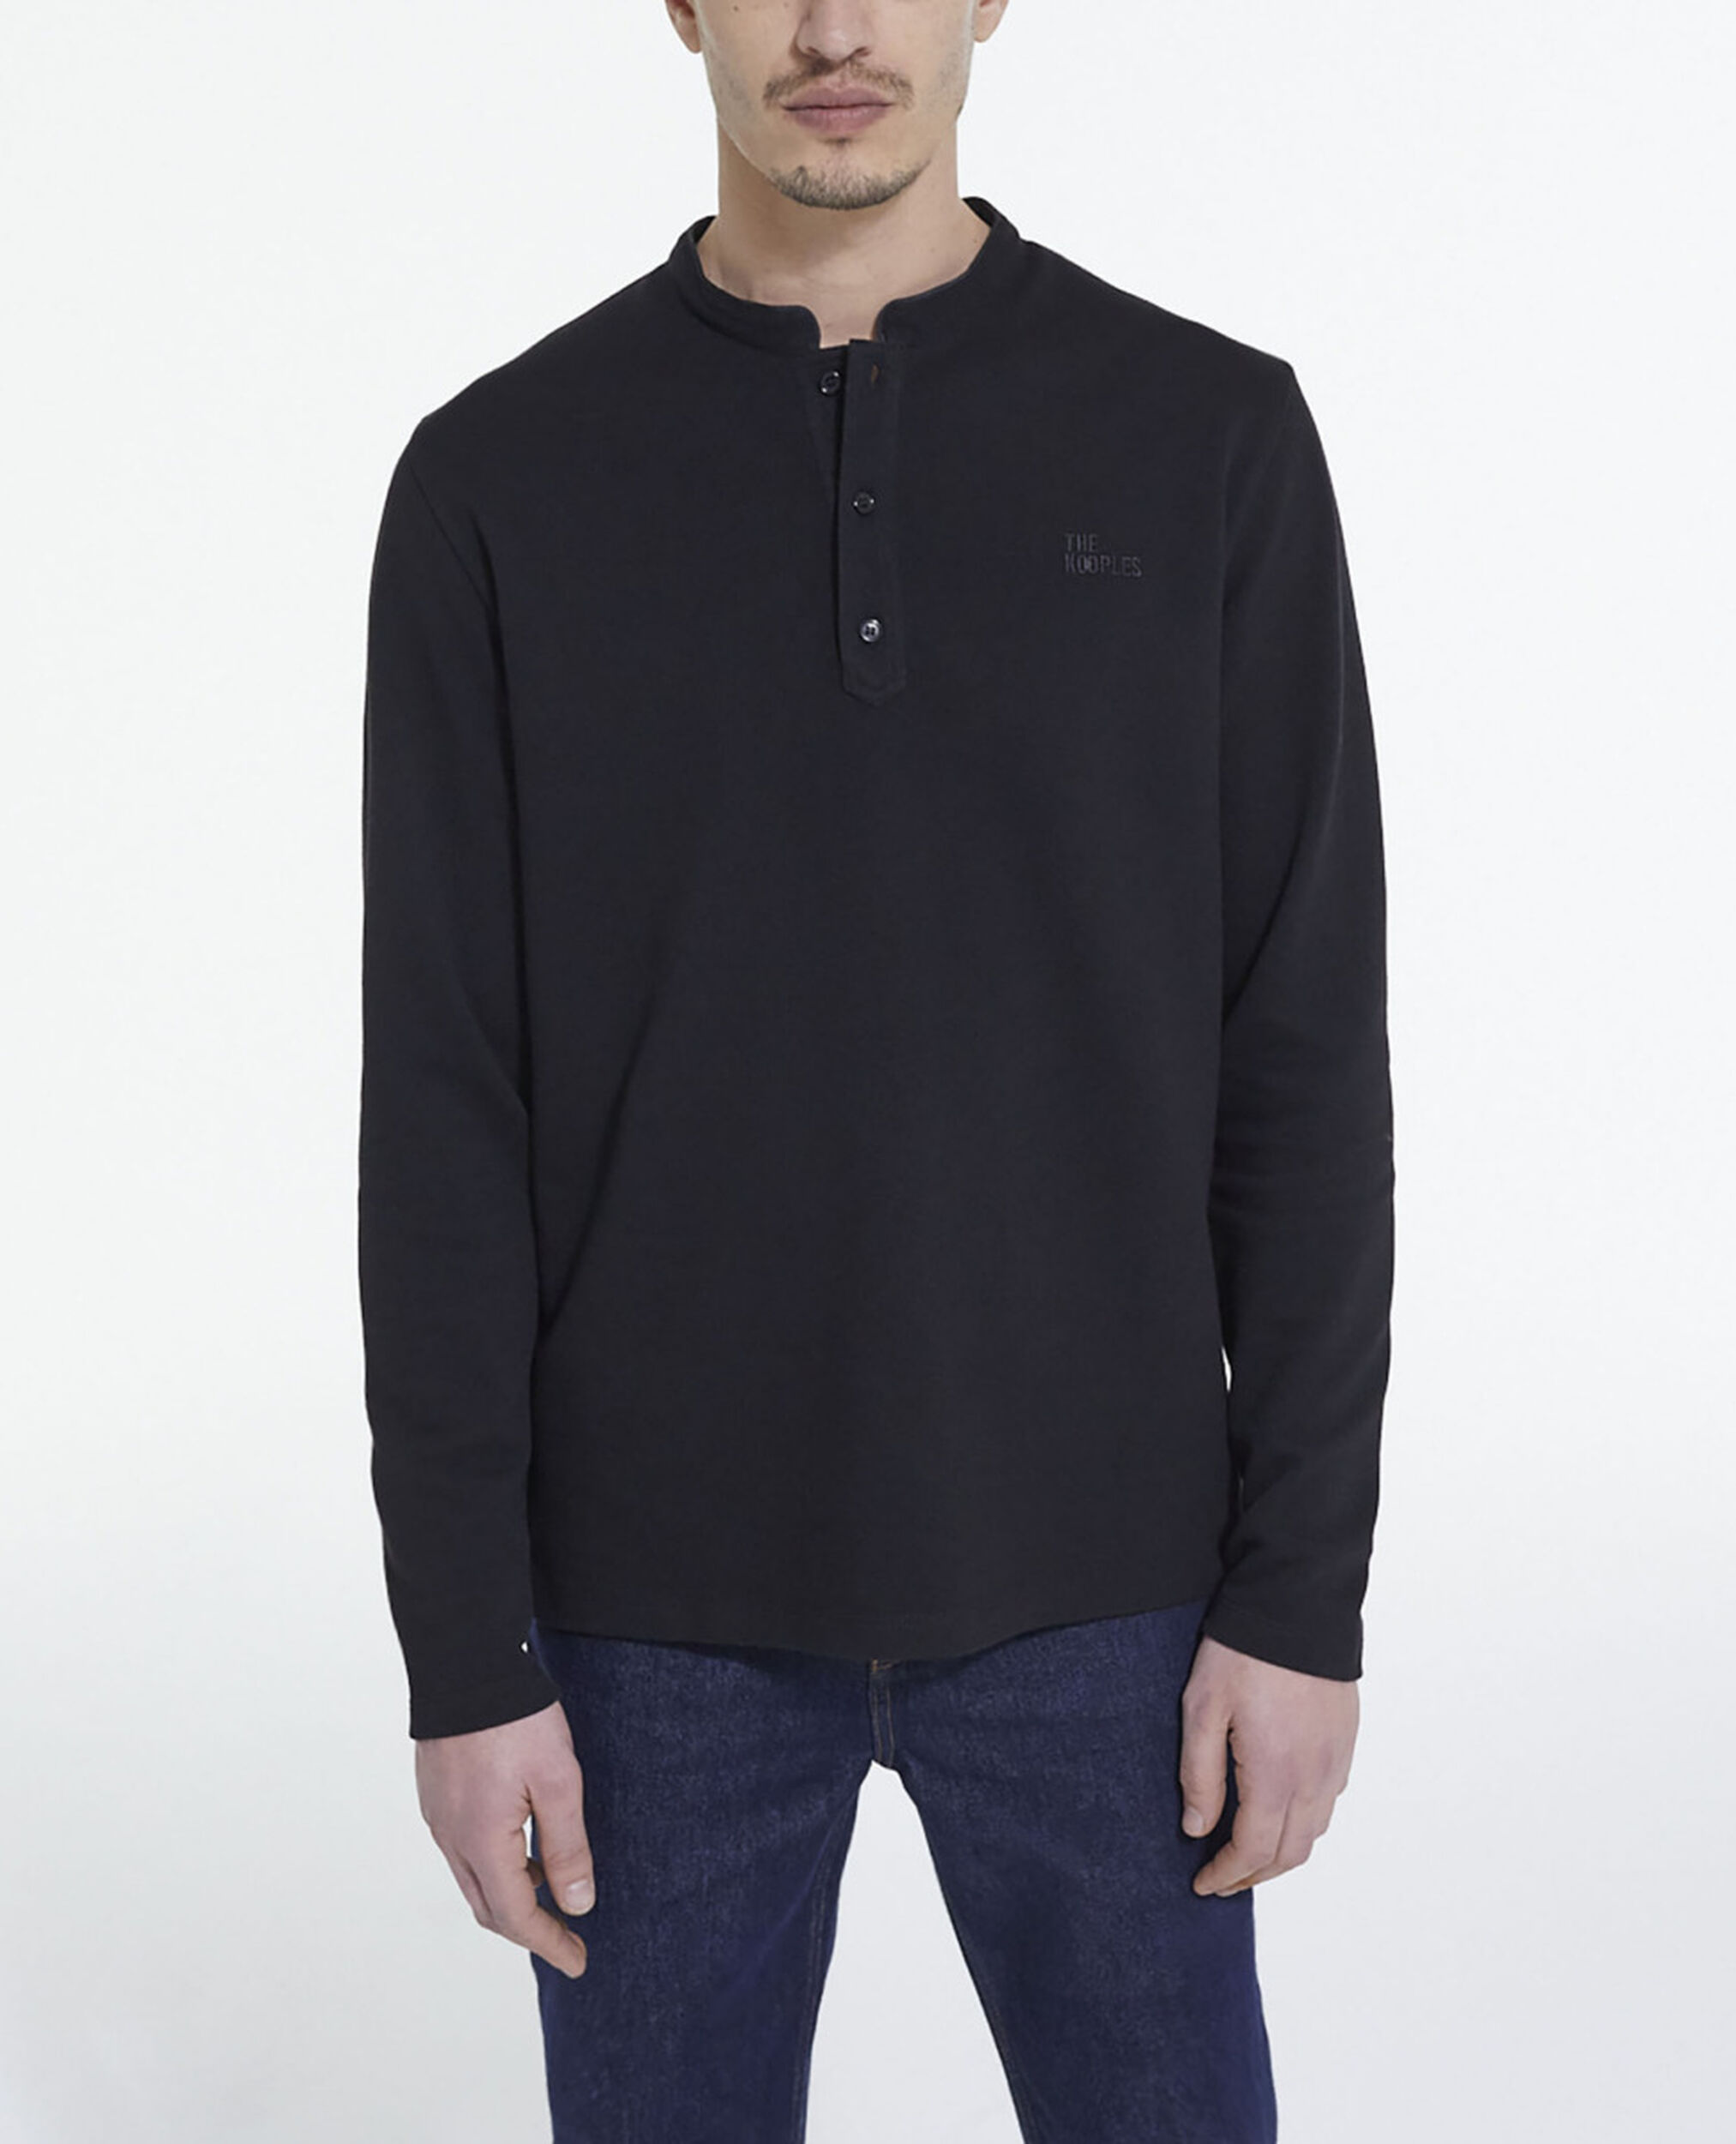 Camisa polo logotipo The Kooples negro, BLACK, hi-res image number null